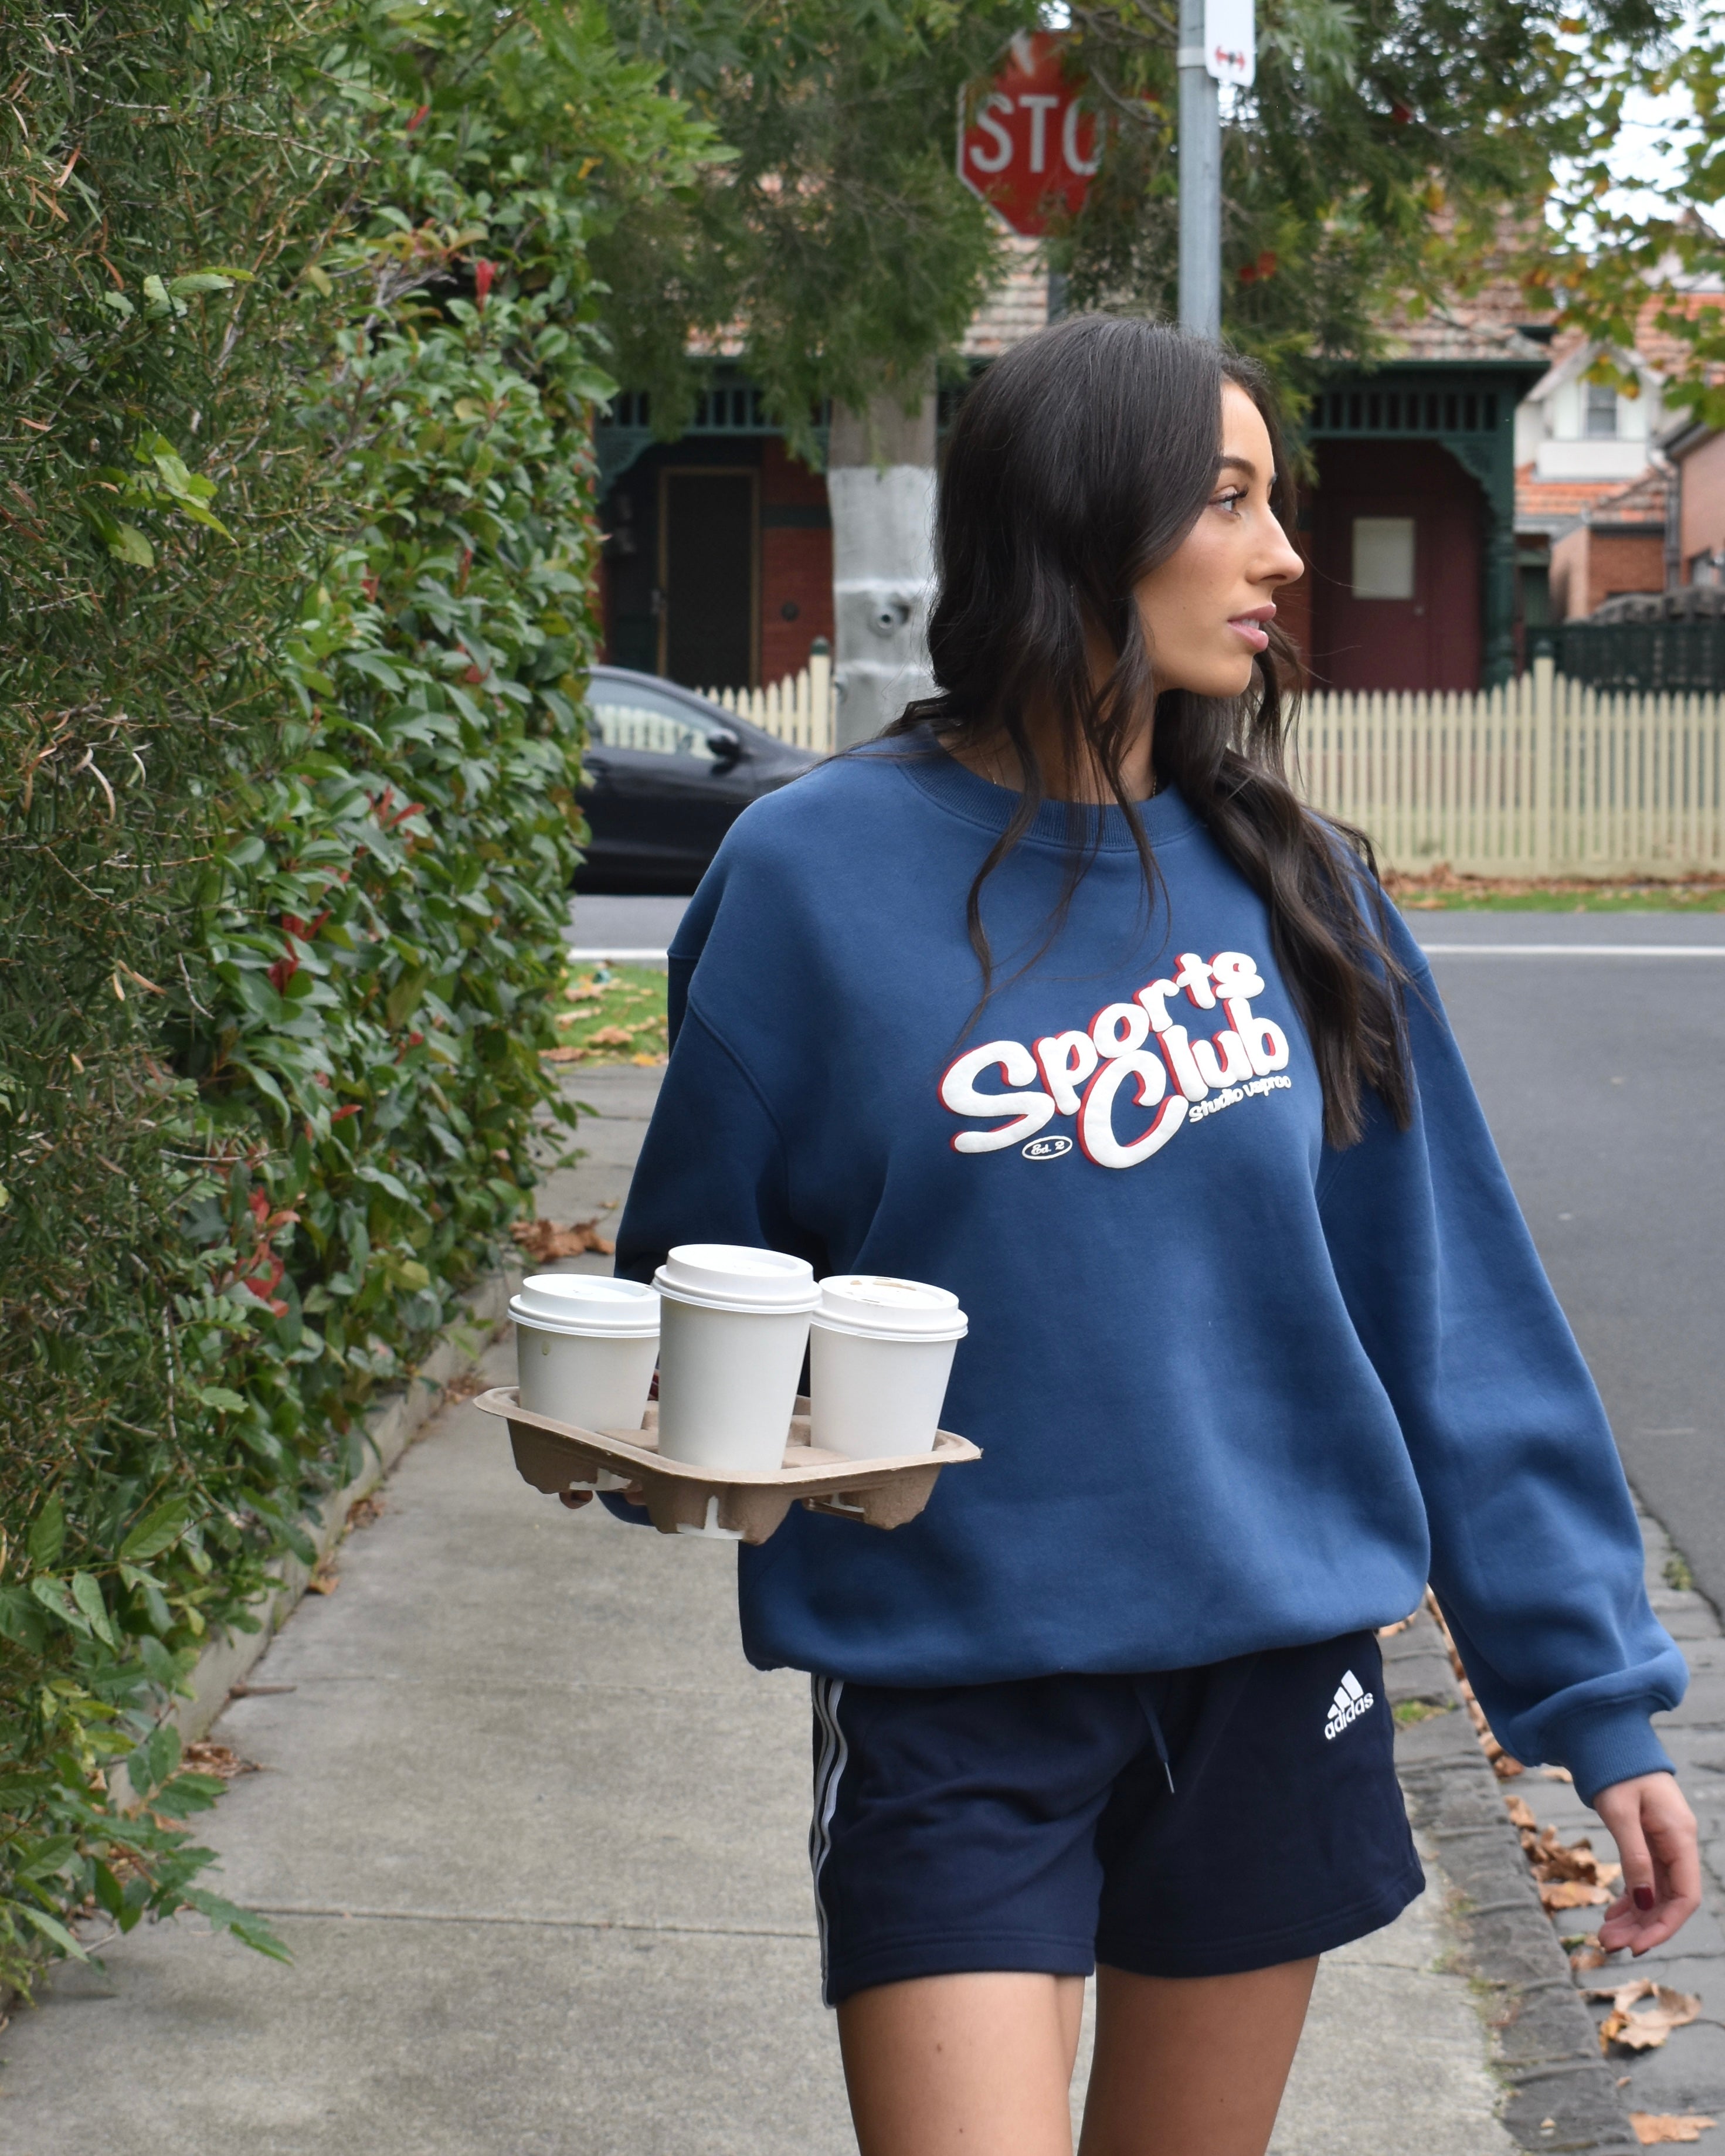 The Sports Club Edition 2 Crewneck in Navy Blue